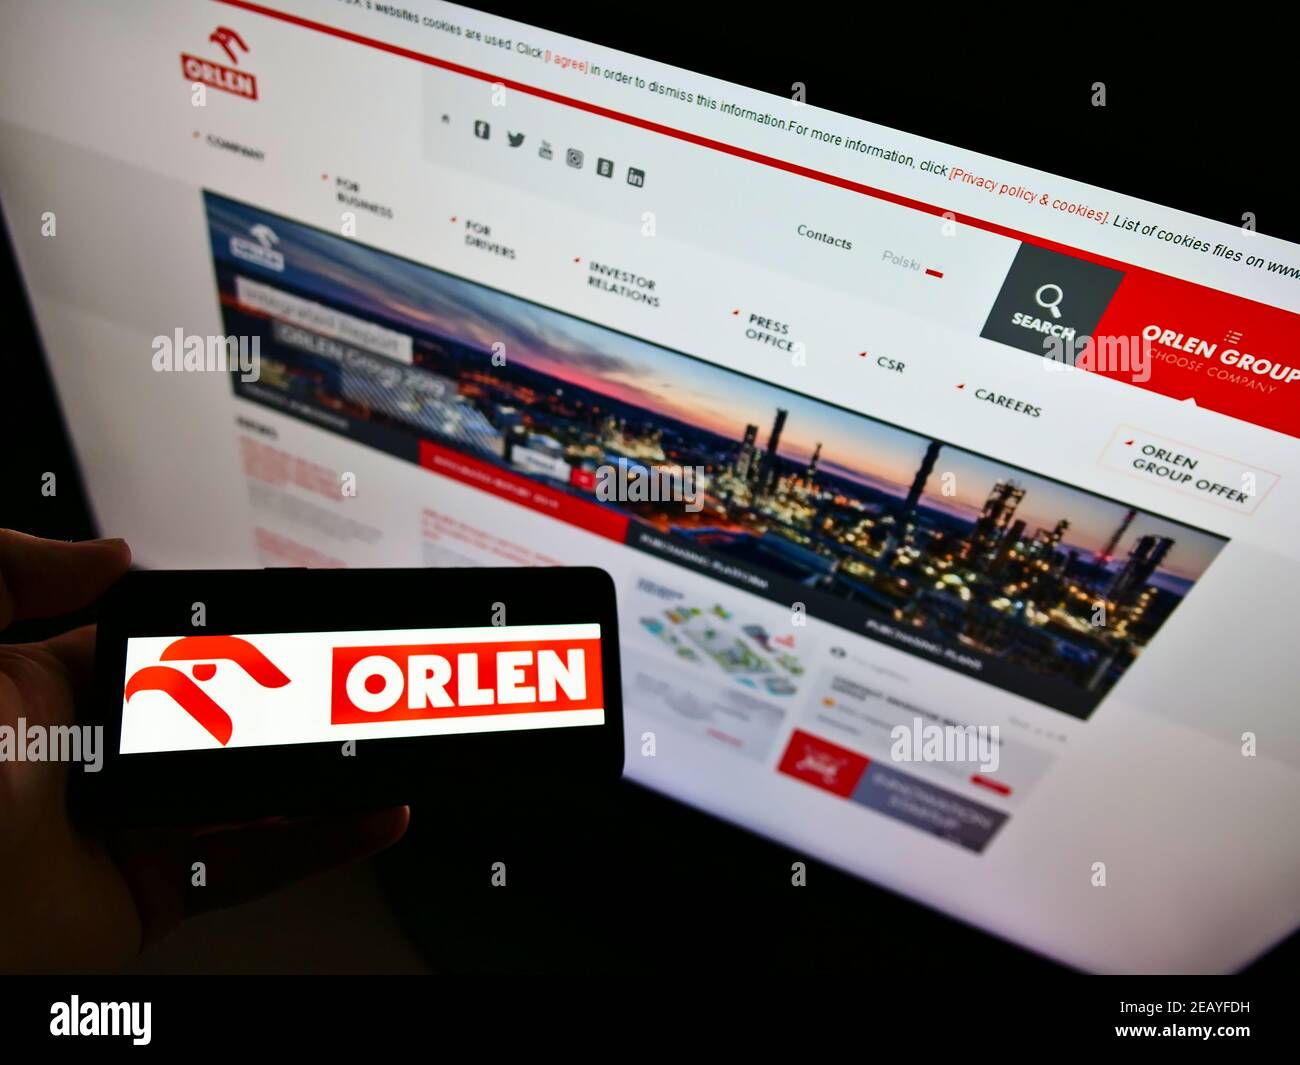 Person holding smartphone with logo of Polish oil company Polski Koncern Naftowy (PKN) Orlen on screen in front of website. Focus on phone display. Stock Photo